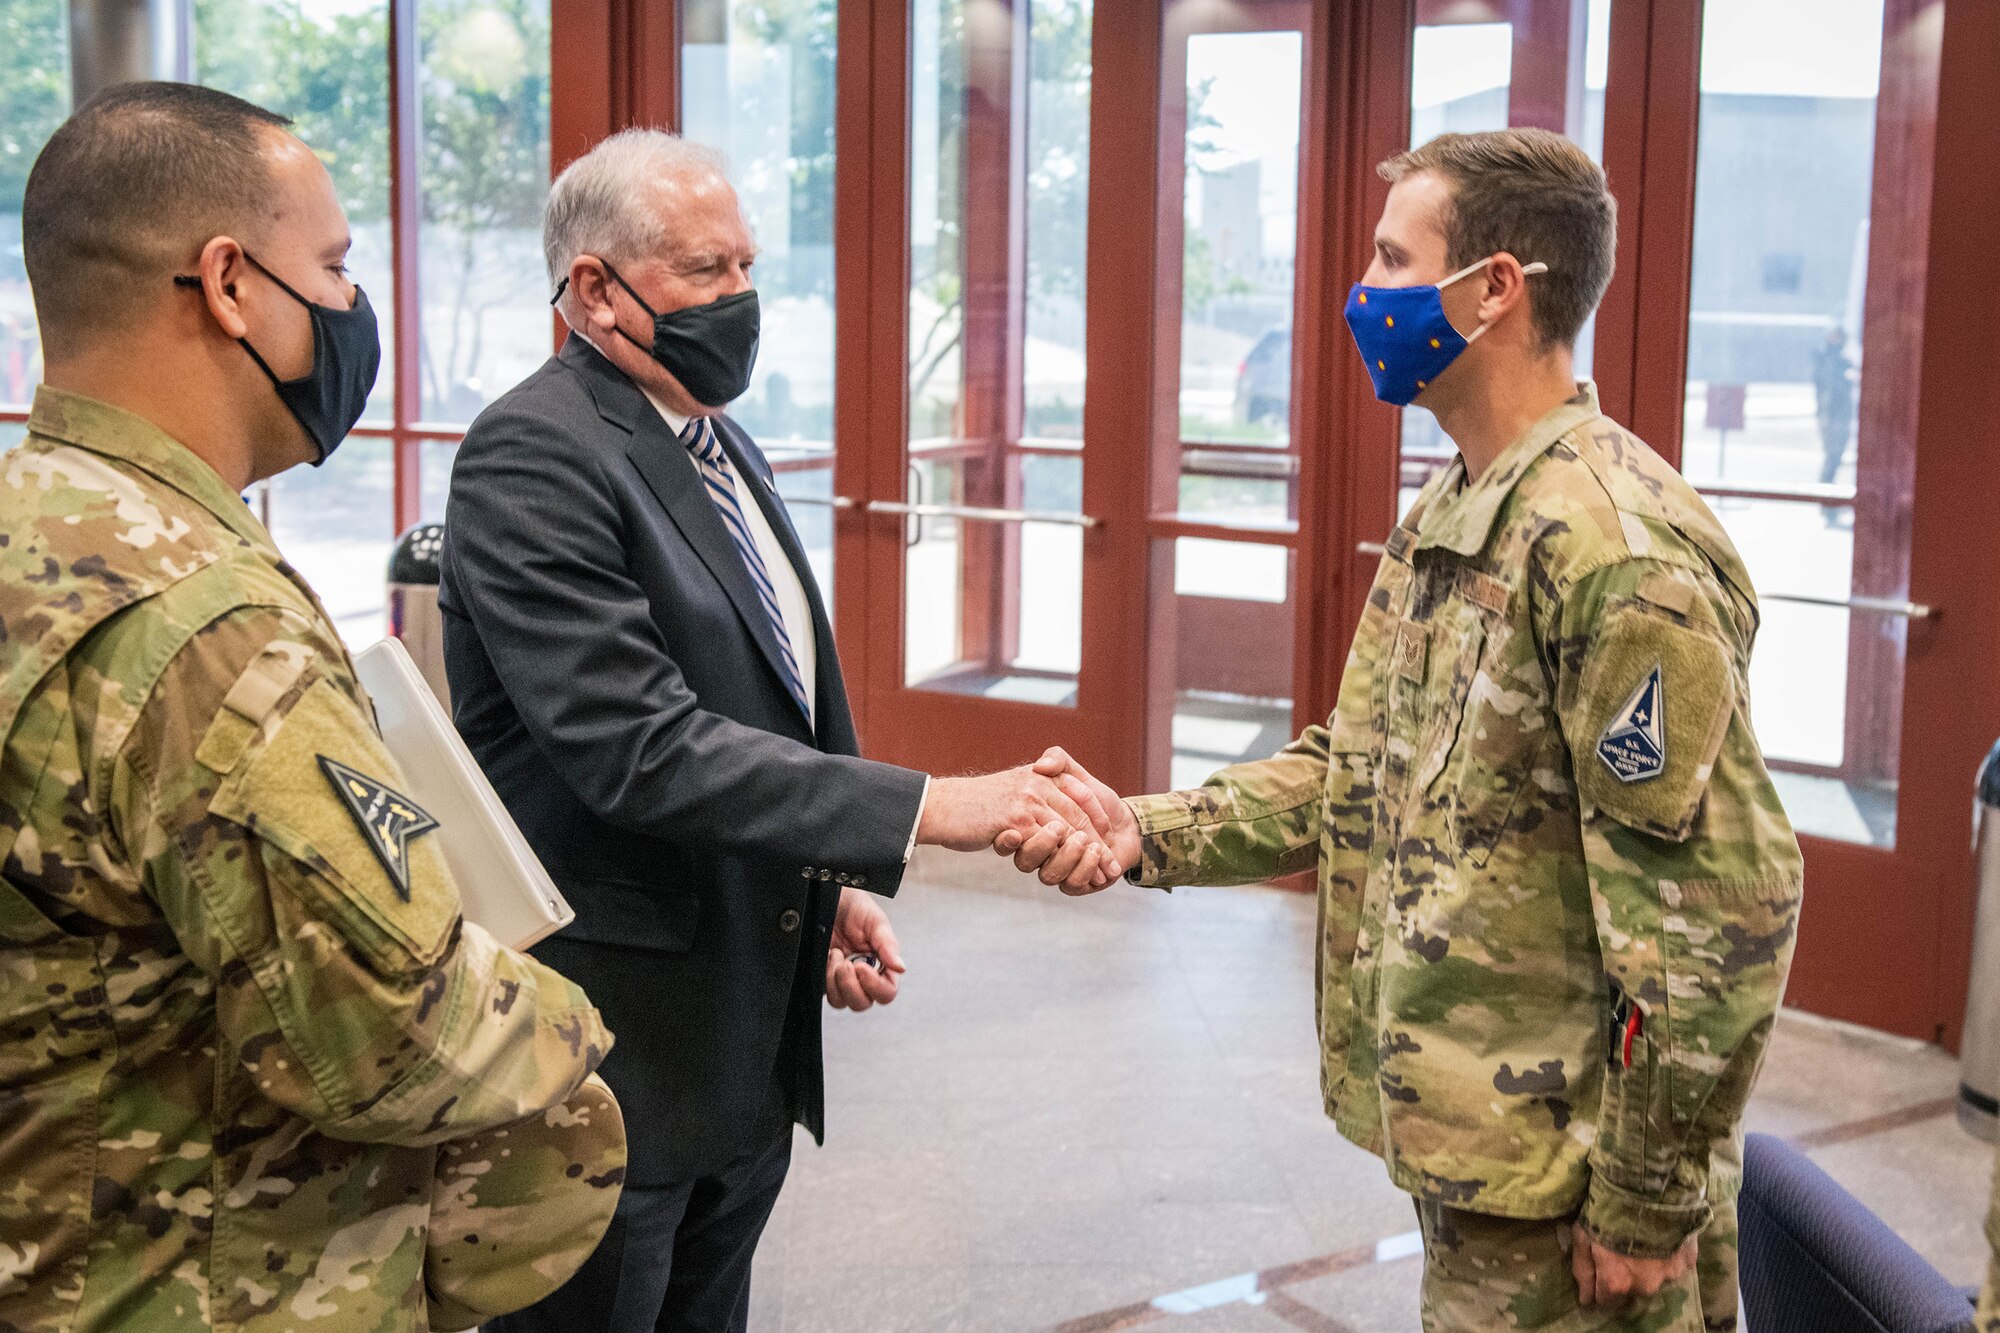 Secretary of the Air Force Frank Kendall gives a challenge coin to U.S. Air Force Staff Sgt. Adam Nevue, a Space Delta 4, Detachment 1 plans and projects NCO, in the Mission Control Station lobby on Buckley Space Force Base, Colo., Aug. 23, 2021.